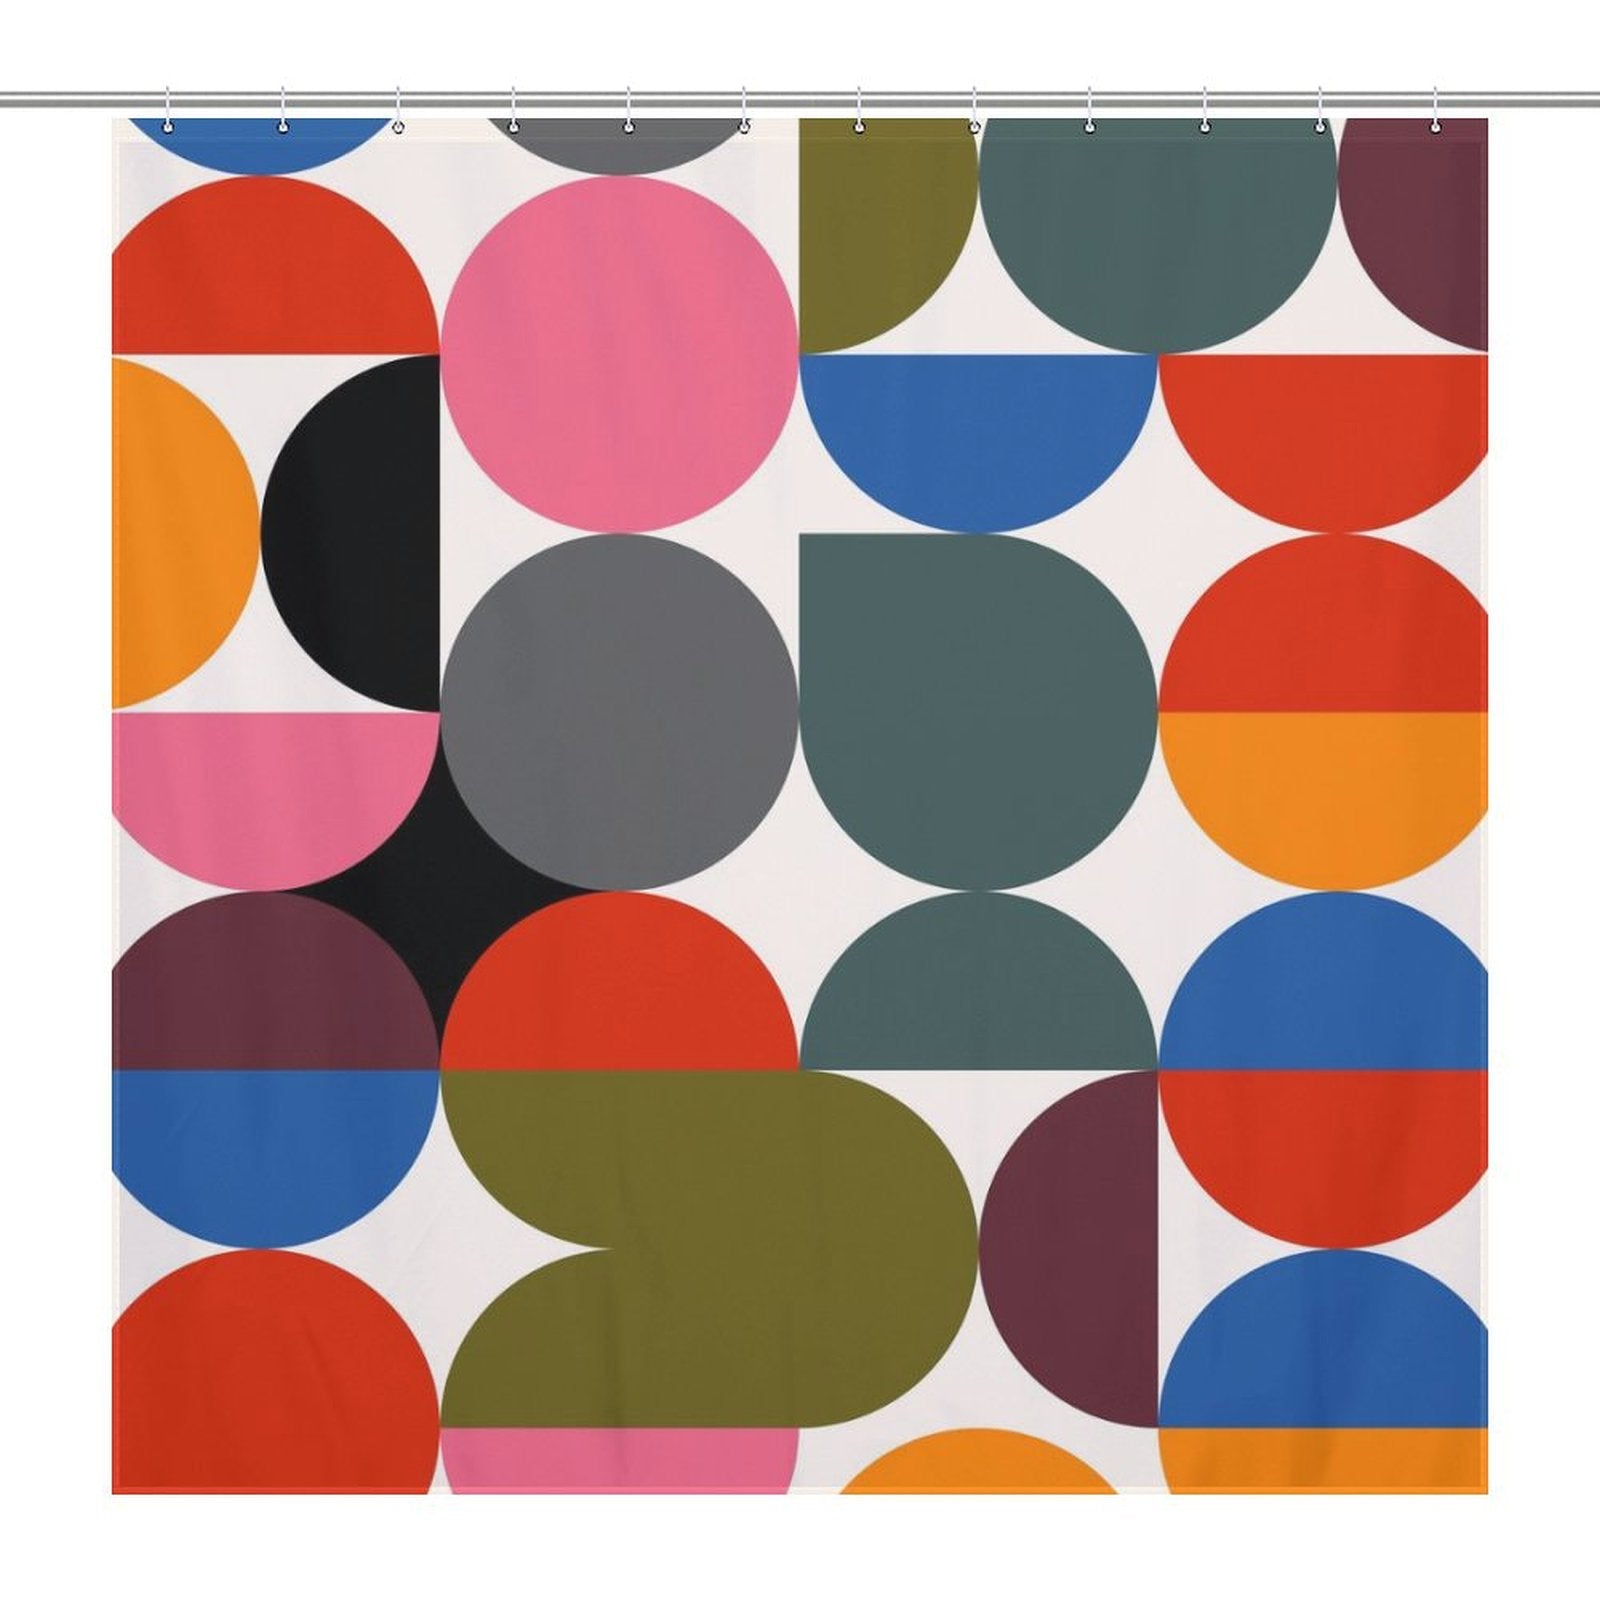 Abstract Modern Art Rainbow Polka Dot Geometric Shower Curtain-Cottoncat by Cotton Cat featuring a colorful abstract modern art pattern of circles and semi-circles in red, pink, blue, green, orange, black, and white.